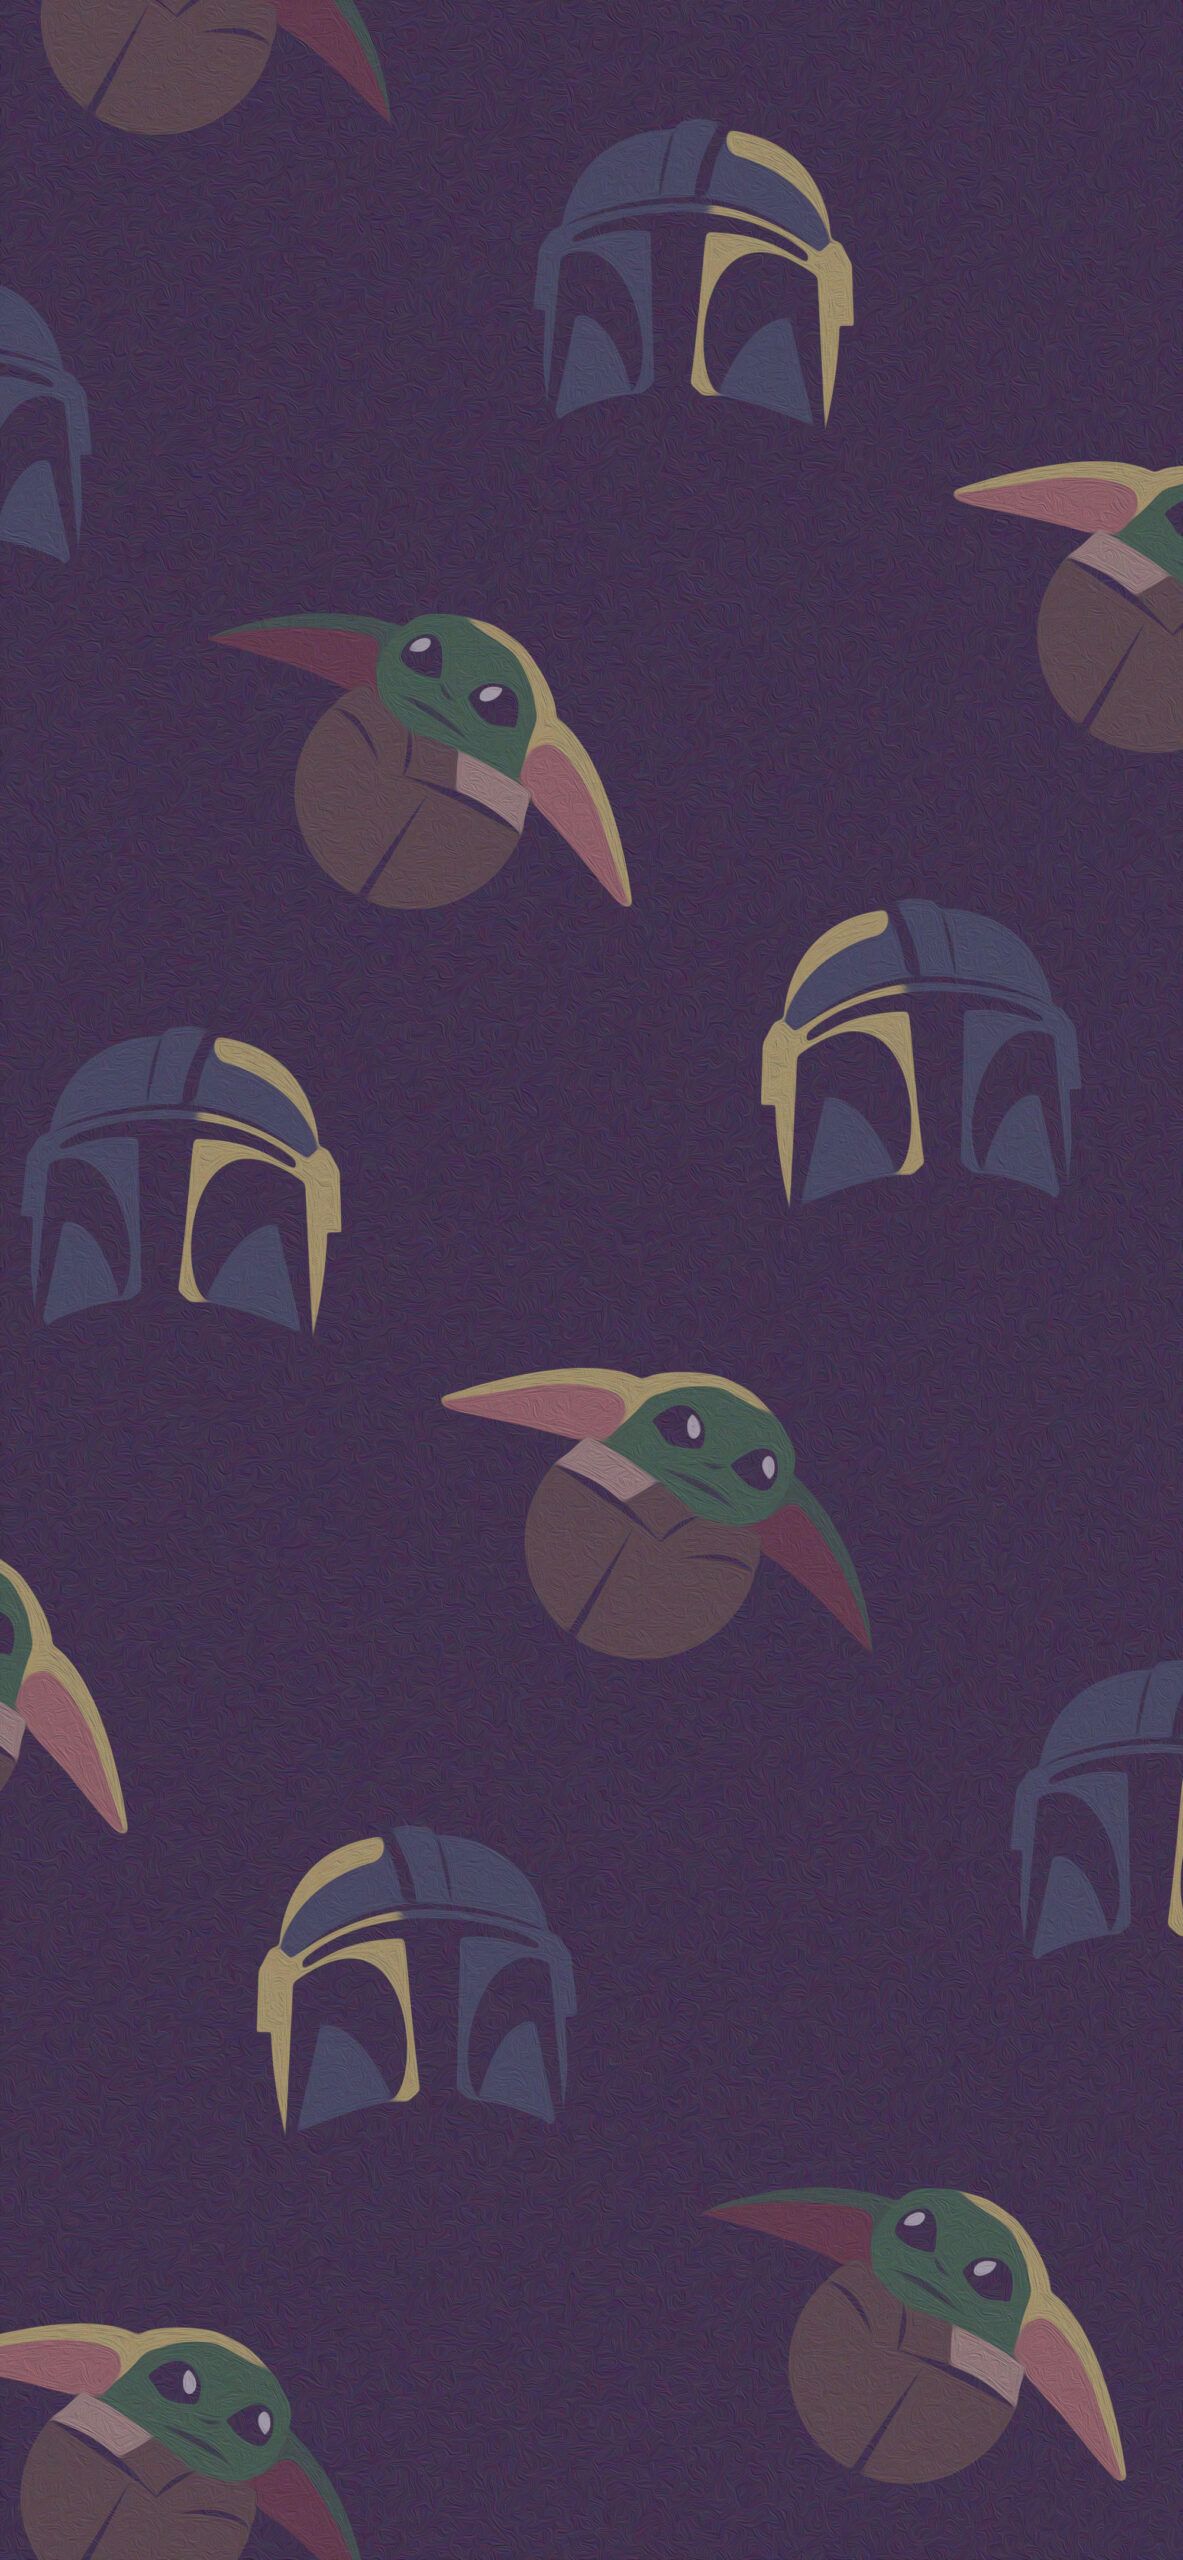 The Mandalorian and The Child wallpaper I made for my phone - Baby Yoda